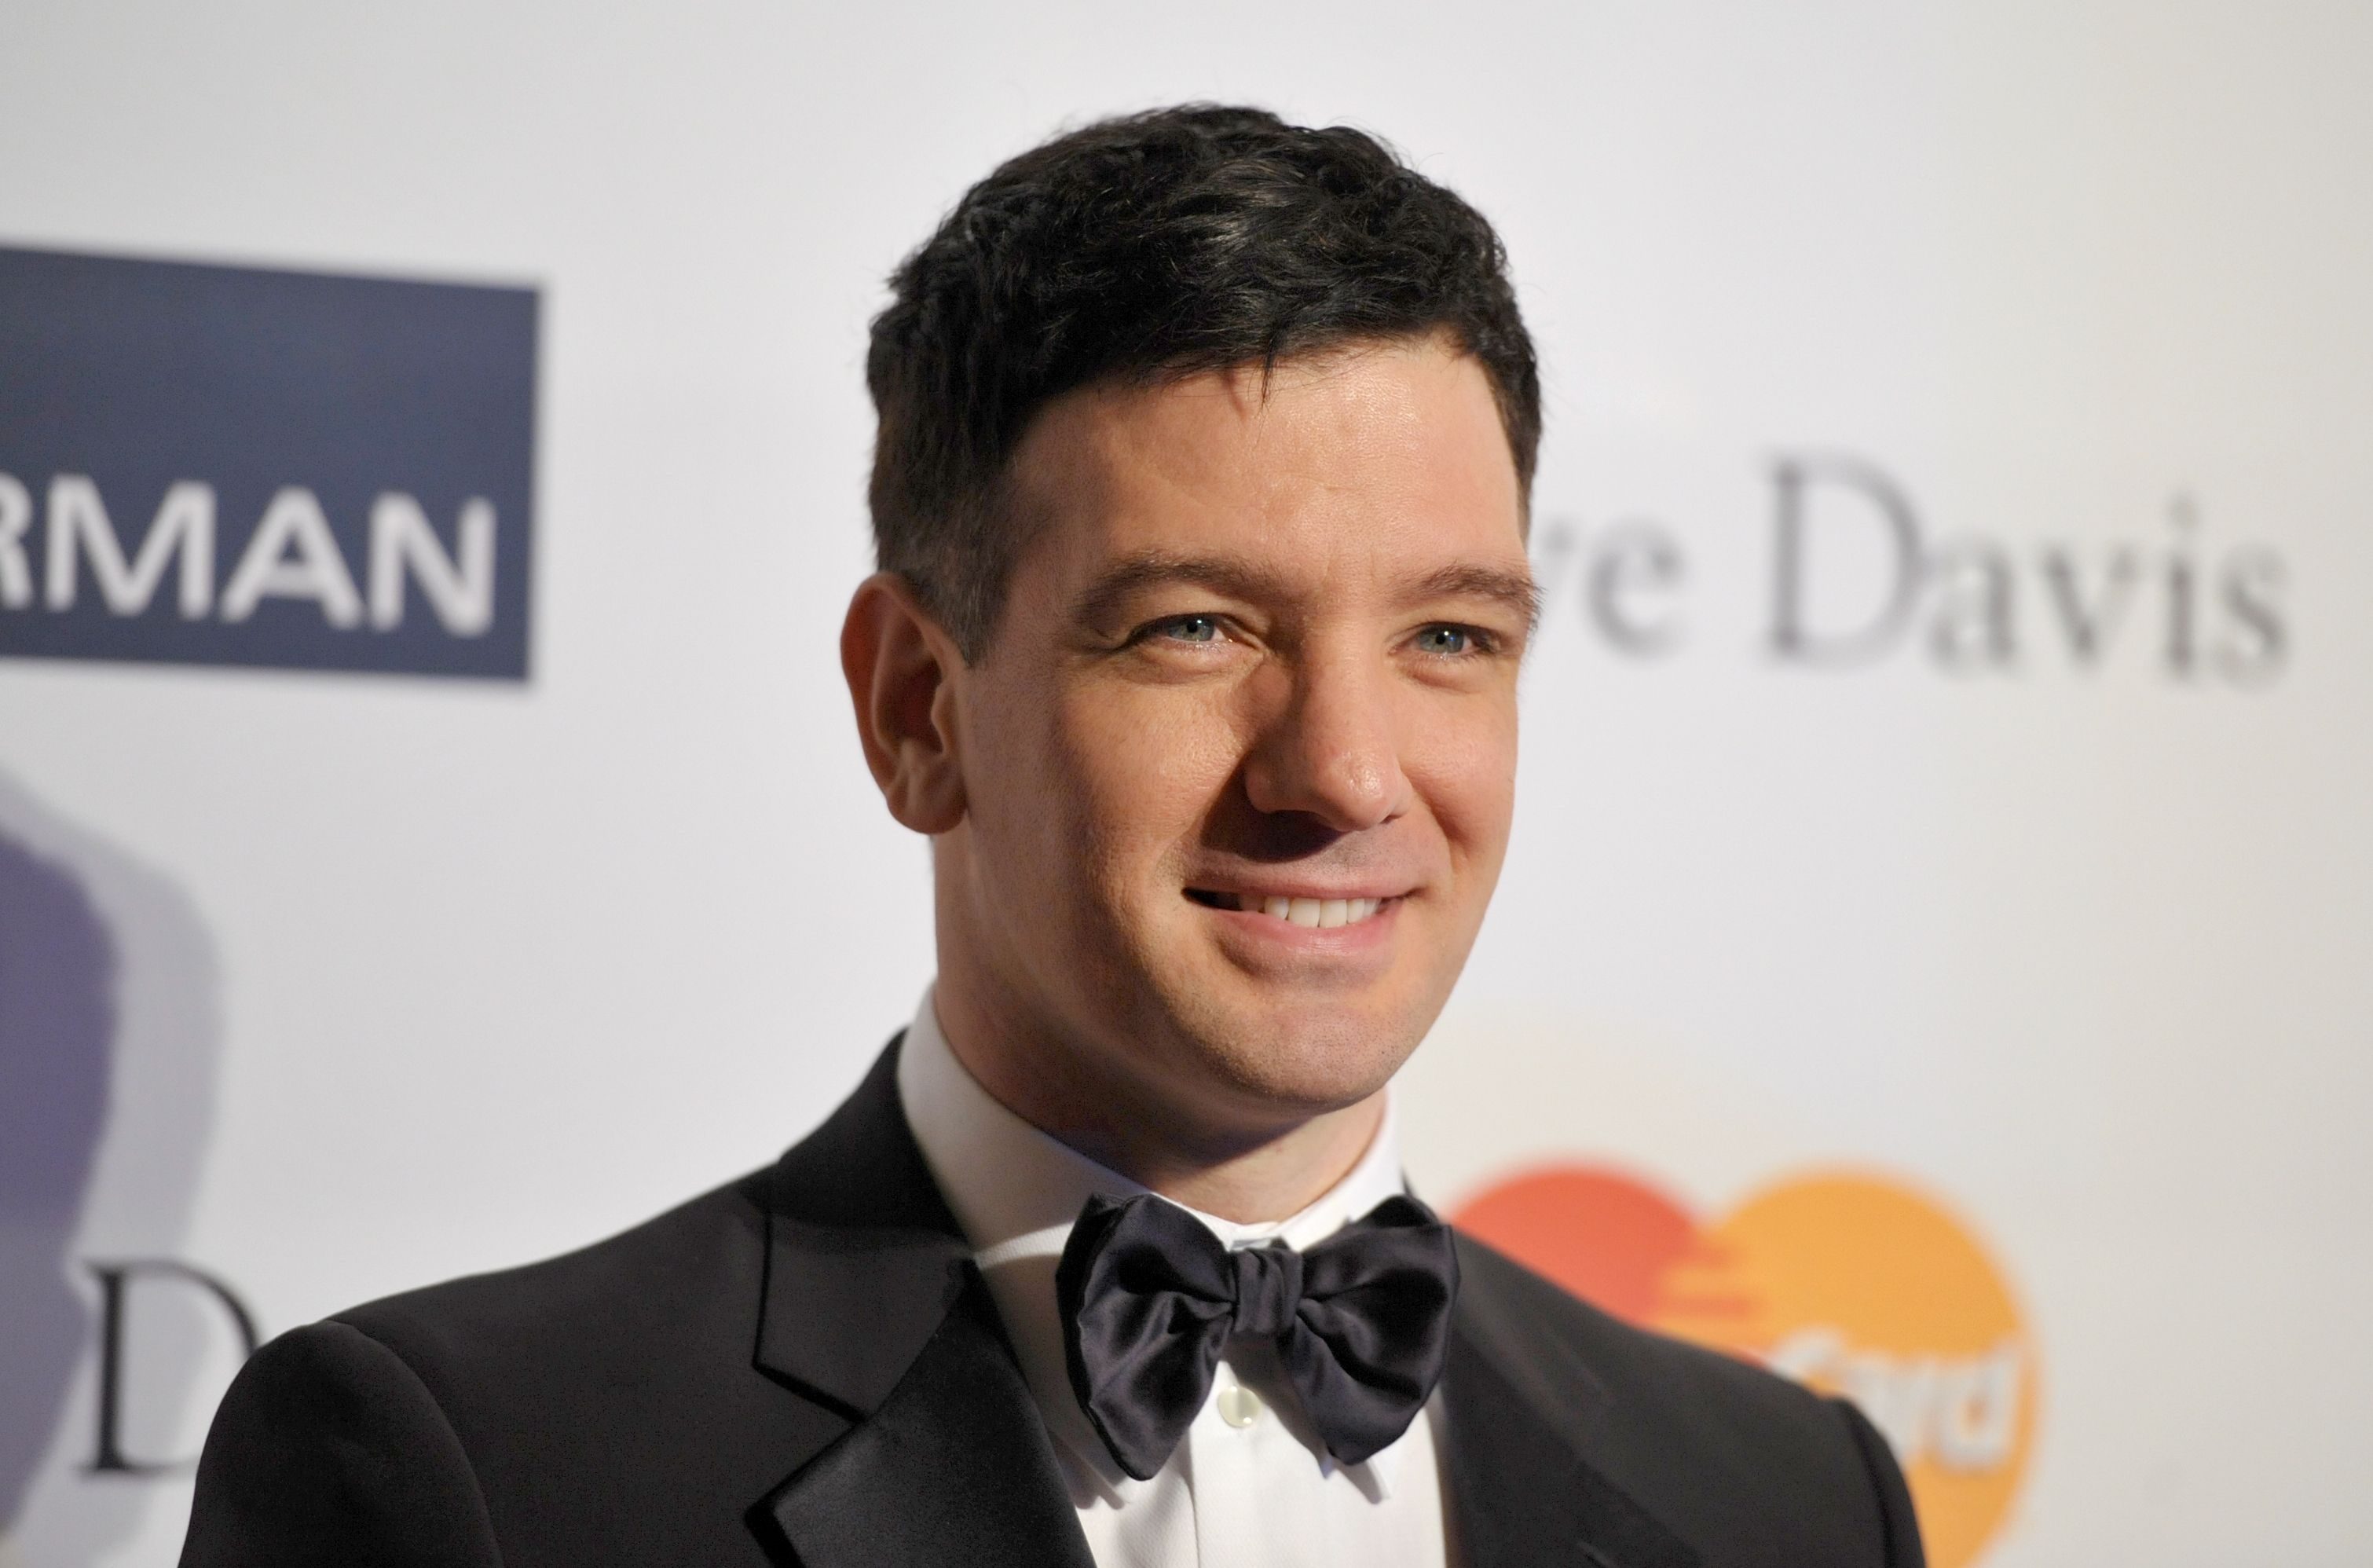 Mandatory Credit: Photo by John Shearer/Invision/AP/Shutterstock (9191631w) JC Chasez arrives at the Clive Davis Pre-GRAMMY Gala on in Beverly Hills, Calif 2013 Clive Davis Pre-GRAMMY Gala - Arrivals, Beverly Hills, USA - 9 Feb 2013